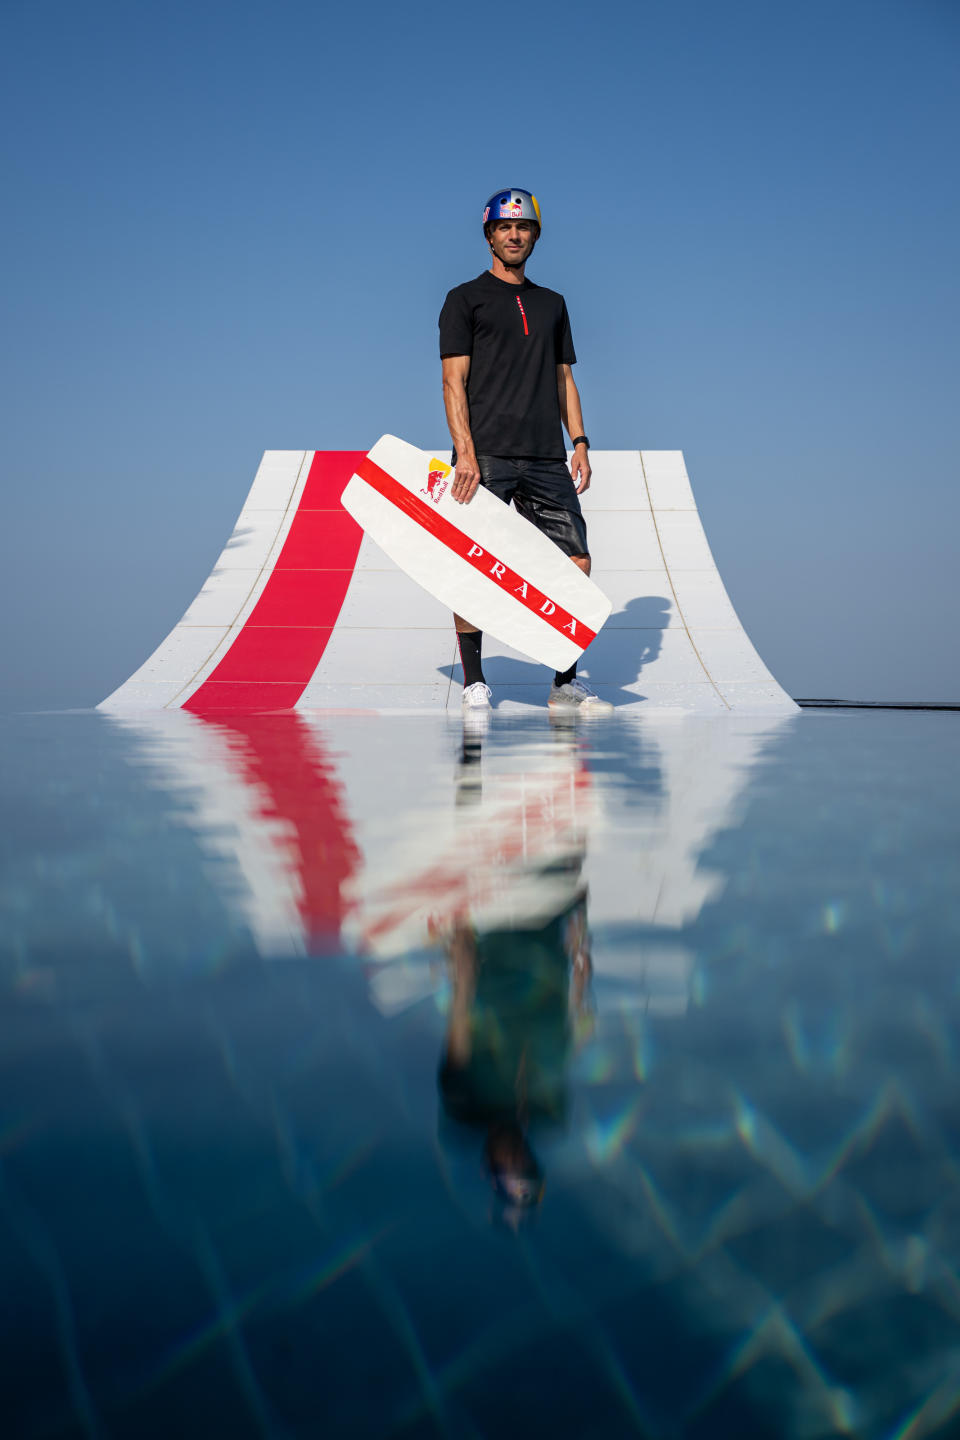 Brian Grubb of the United States seen during the WakeBASE project at the Adress Beach Resort in Dubai, United Arab Emirates on November 29, 2023.